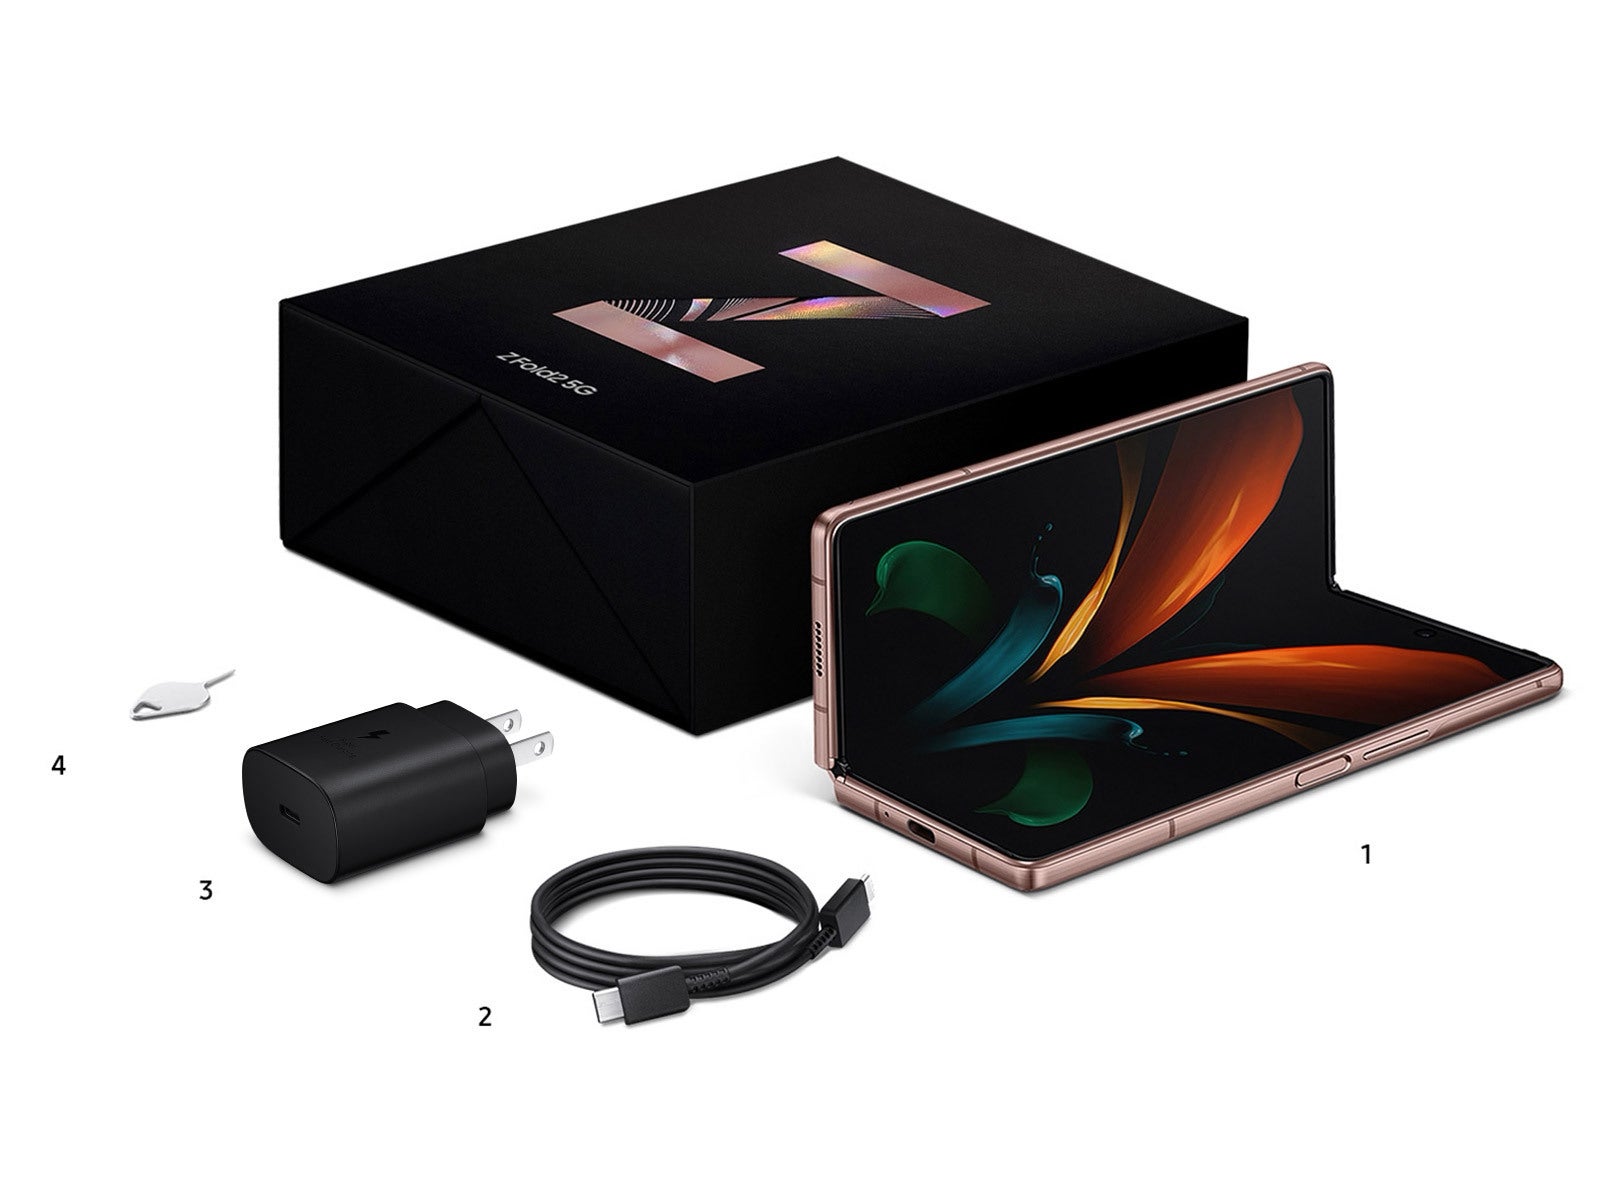 Barren Z Fold 2 box is barren in the US, other countries get the AKG USB-C earphones, but you can phone Samsung to send you a pair - Samsung Galaxy Z Fold 2 5G review: the cool Communicator